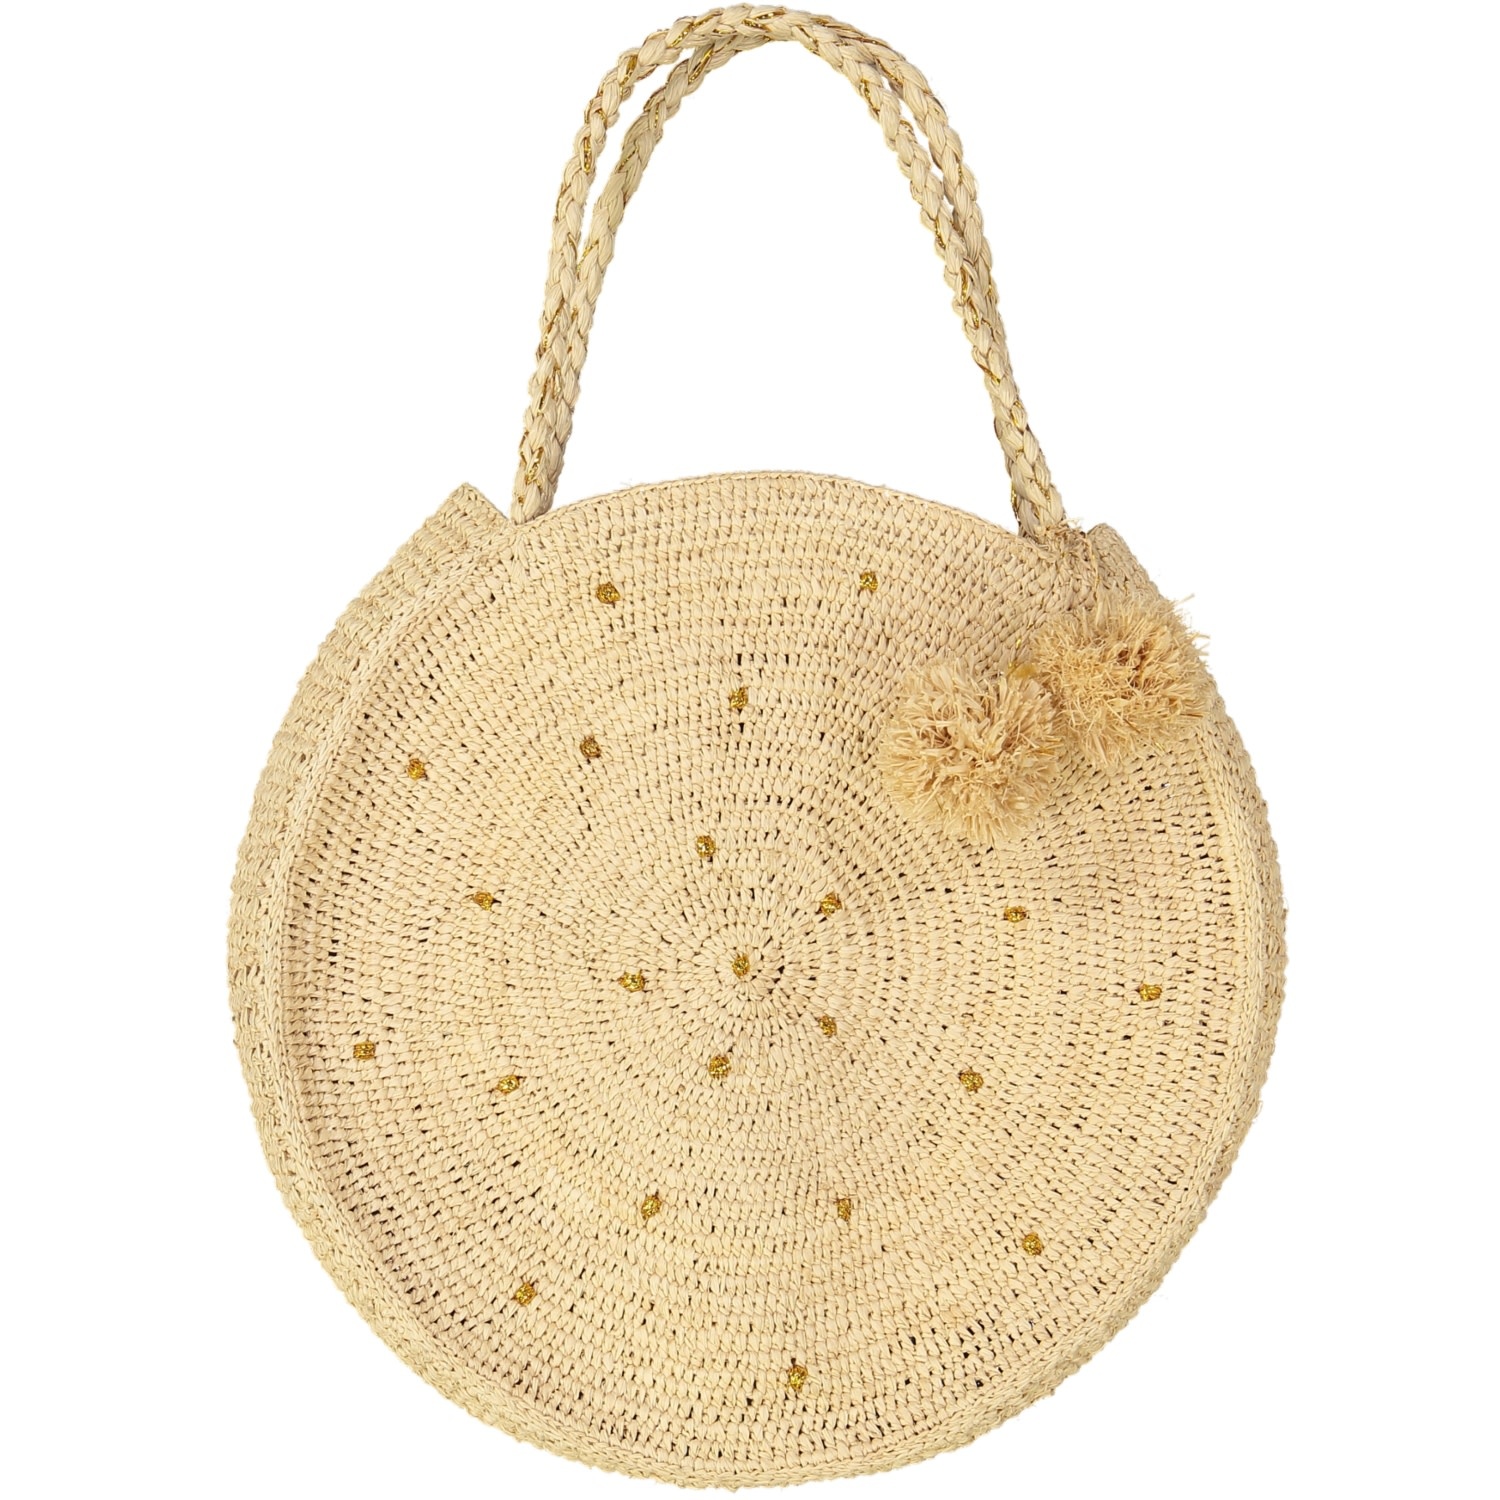 Buy Round Woven Bag Online In India - Etsy India